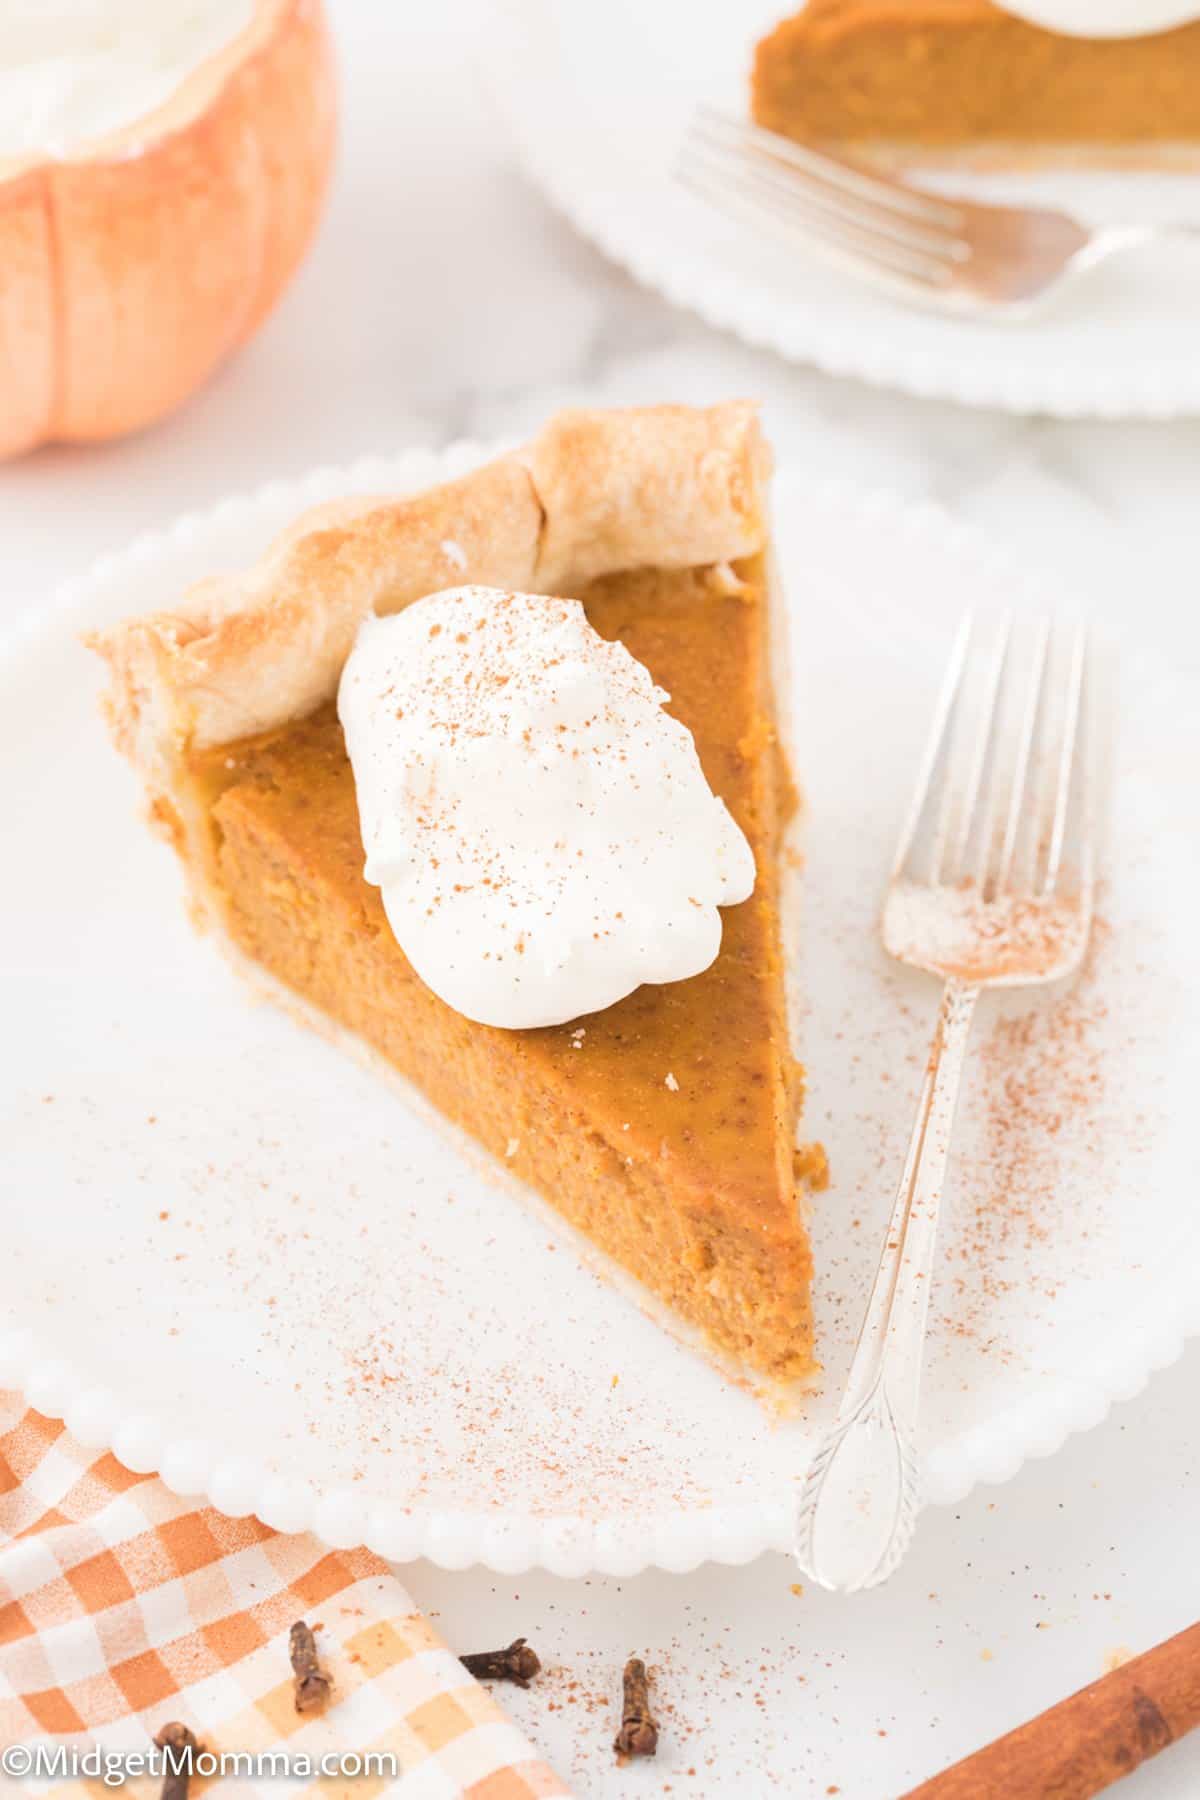 A slice of Pumpkin pie made with real pumpkin